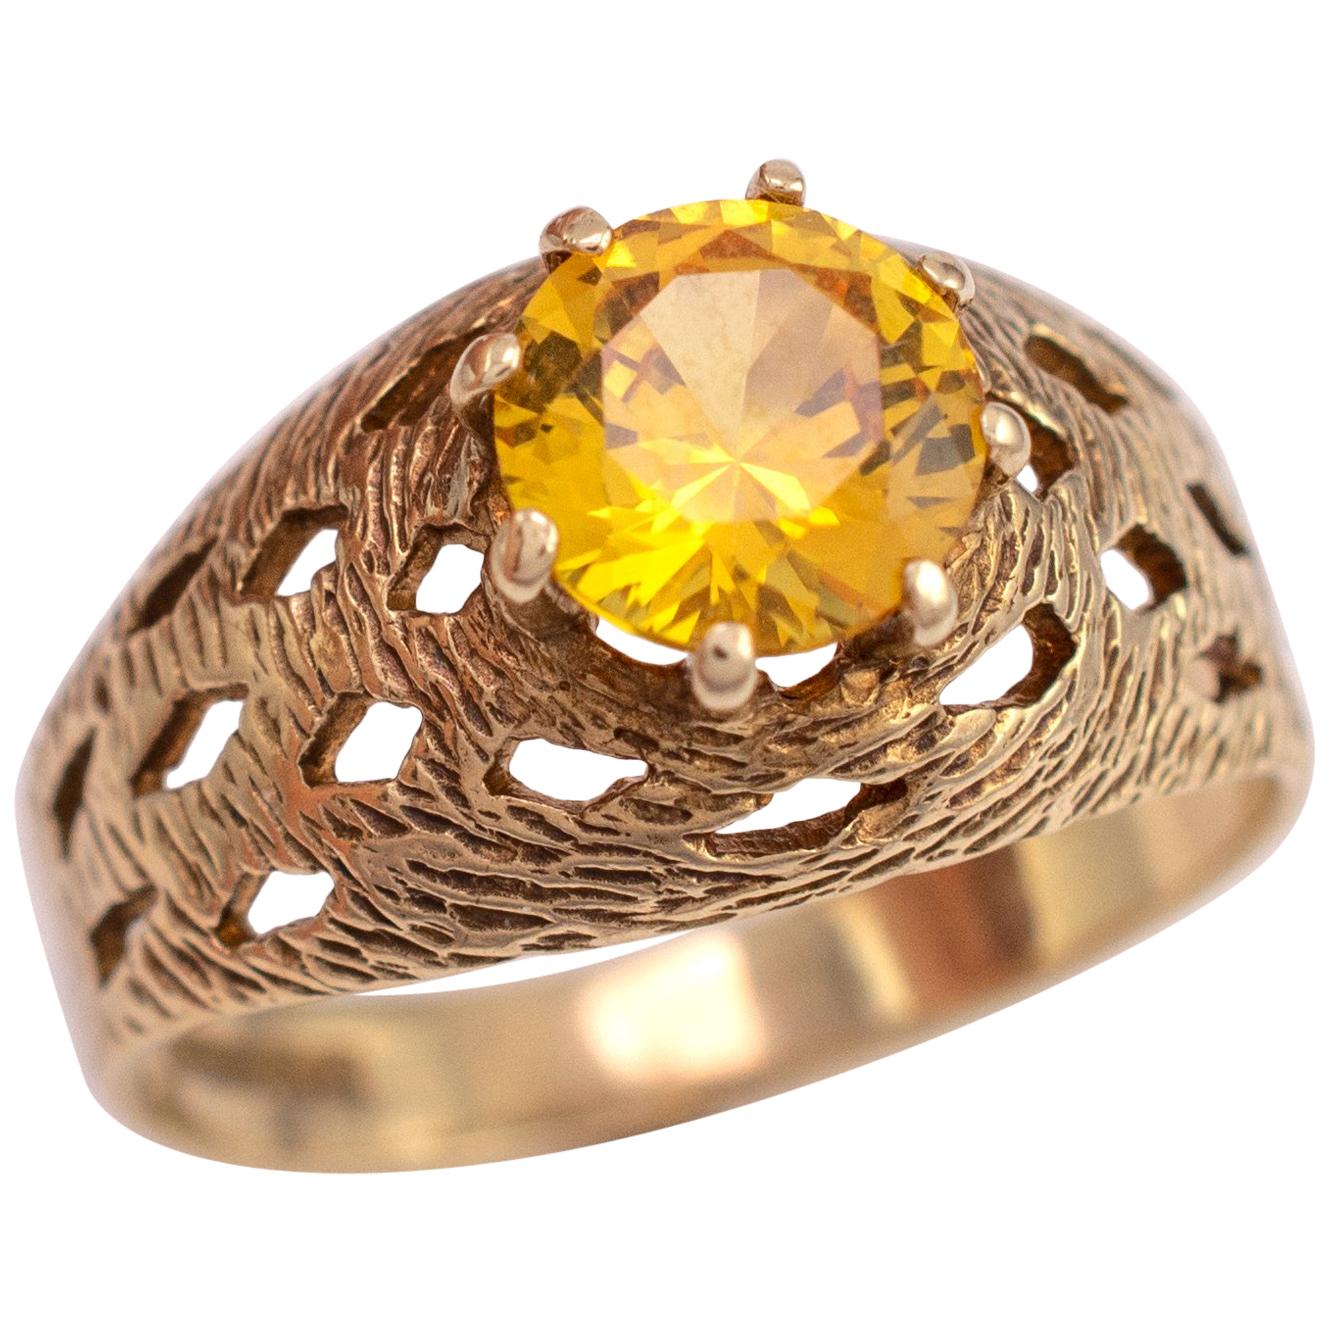 Vintage 19780s Chunky Citrine Solitaire Ring 9 Karat Gold Hallmark Dated 1974 For Sale